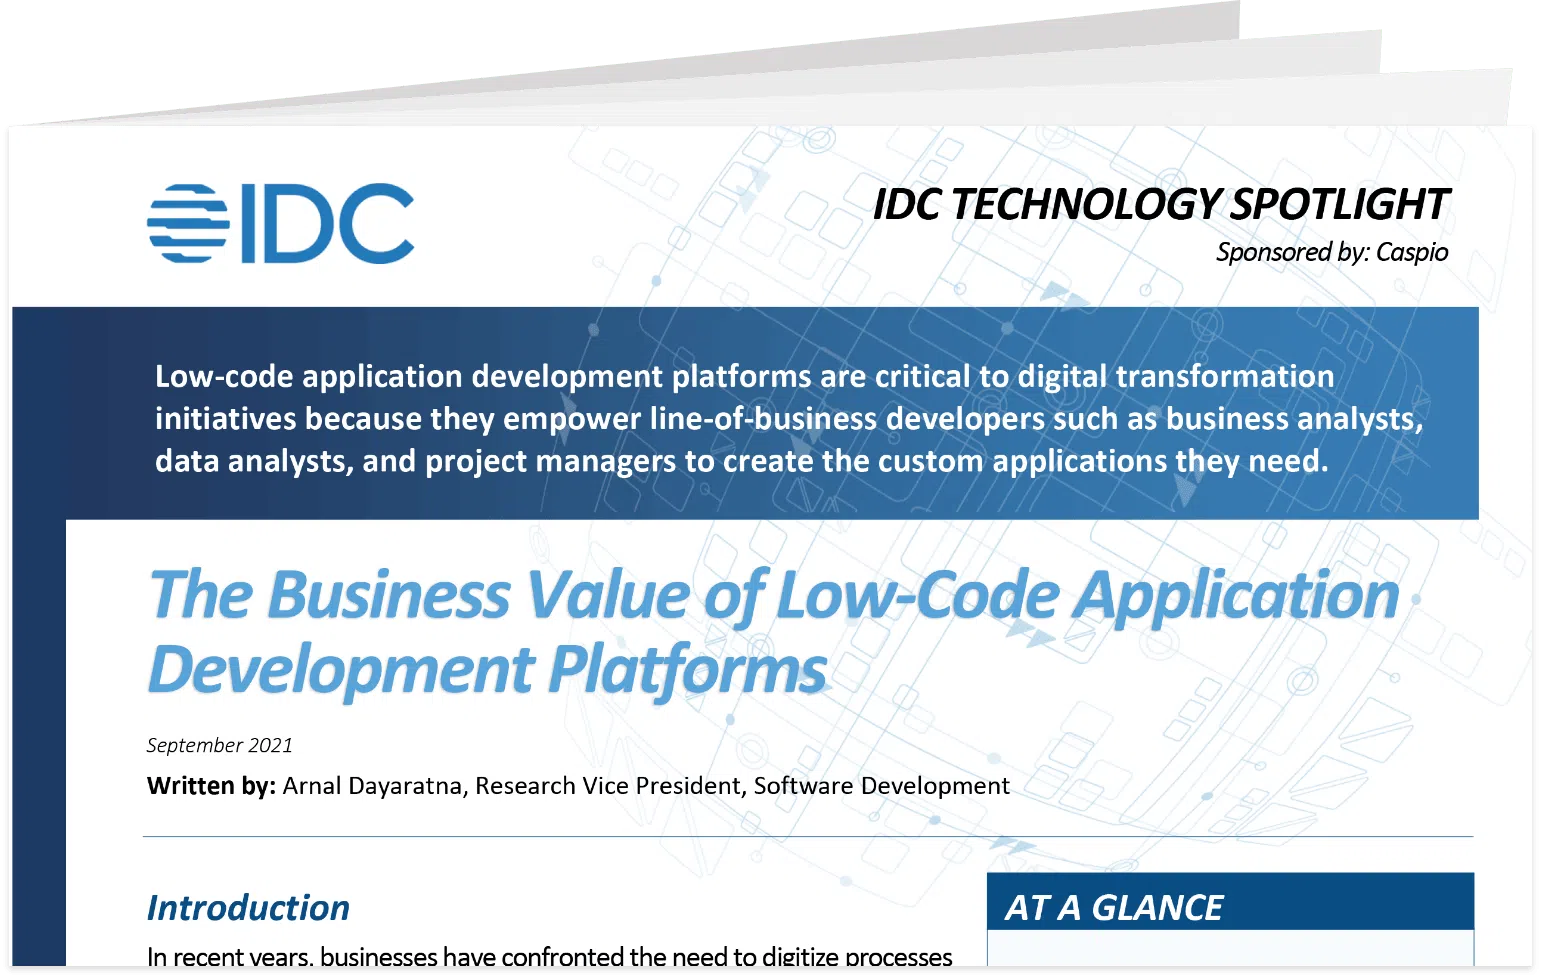 The Business Value of Low-Code Development Platforms